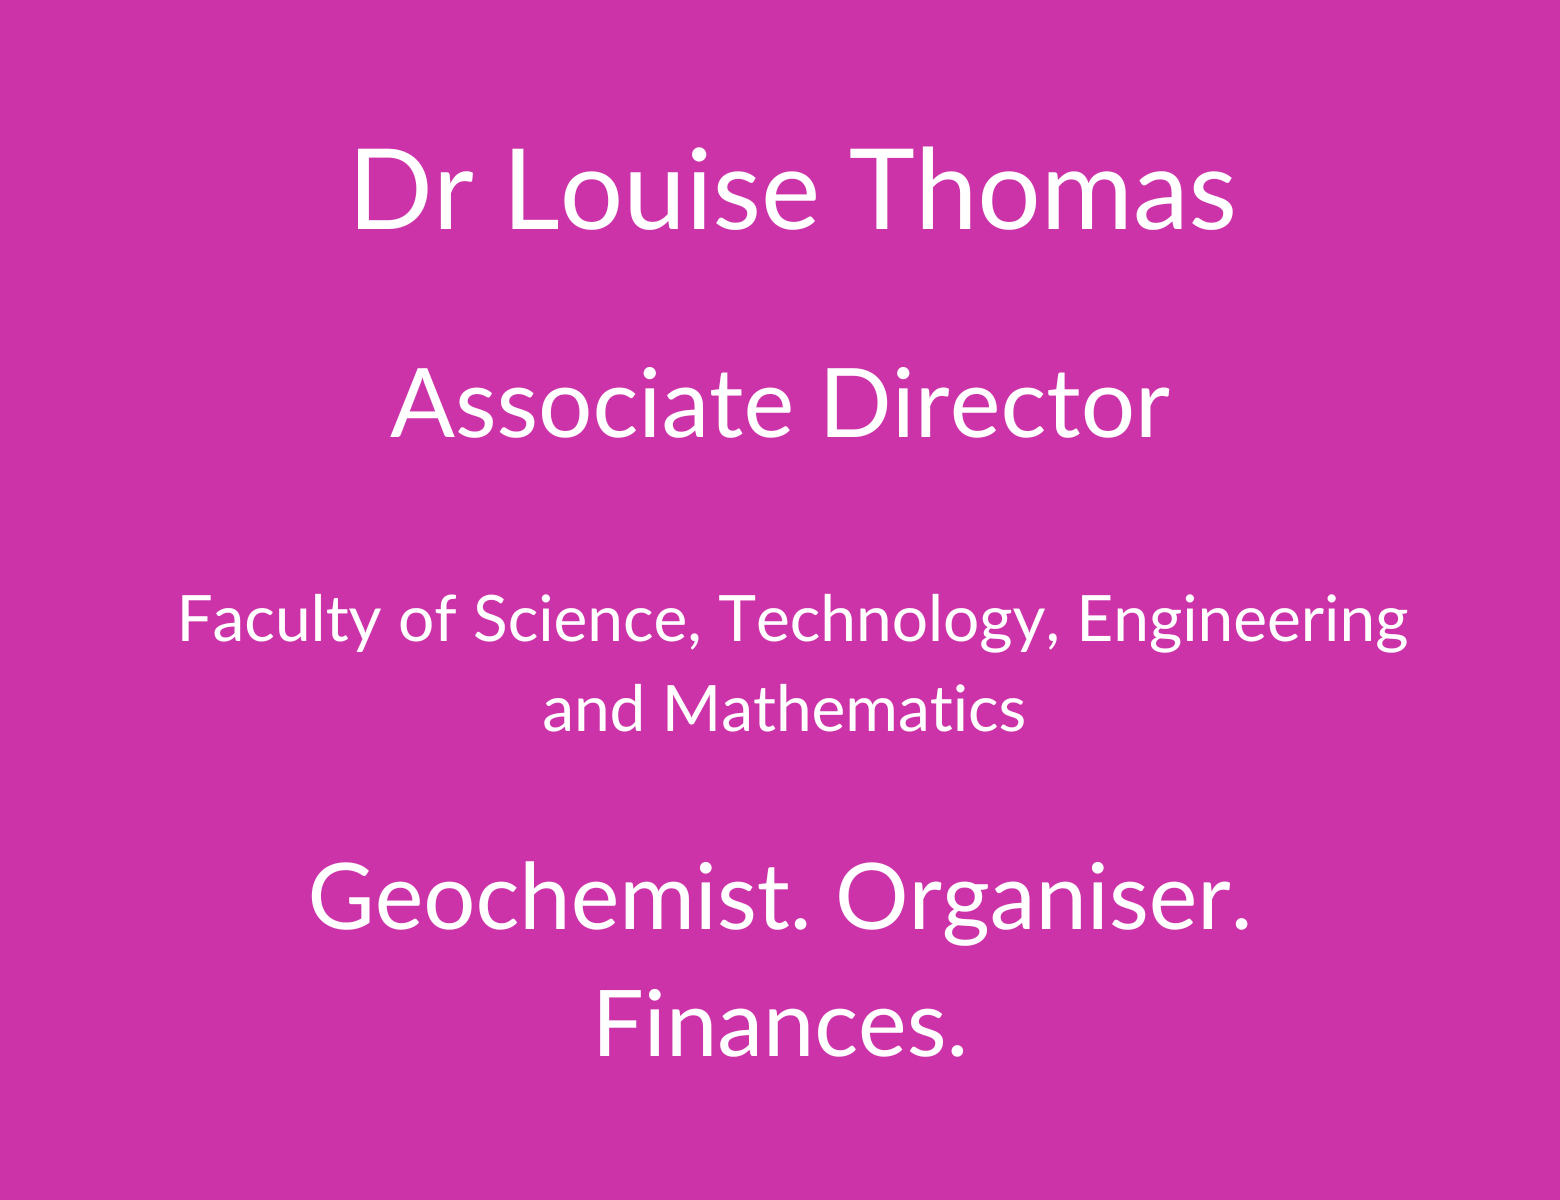 Dr Louise Thomas. Senior Manager. Faculty of Science. Technology, Engineering and Mathematics. Geochemist. Organiser. Finances.